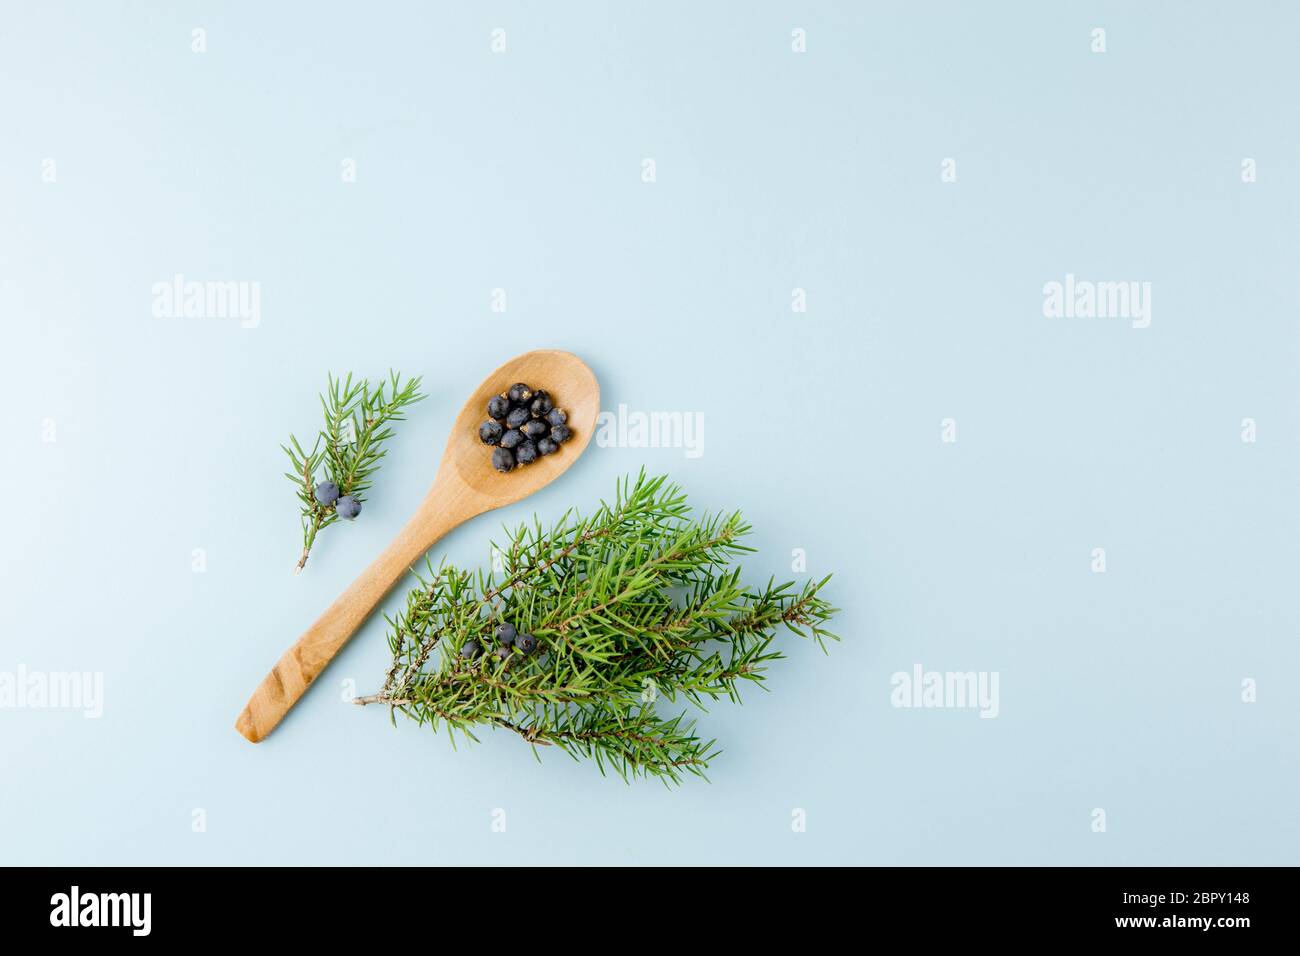 Top view of Juniper latin Juniperus communis berries on wooden spoon, juniper tree branch with confier cones and berries scattered around, copy space. Stock Photo